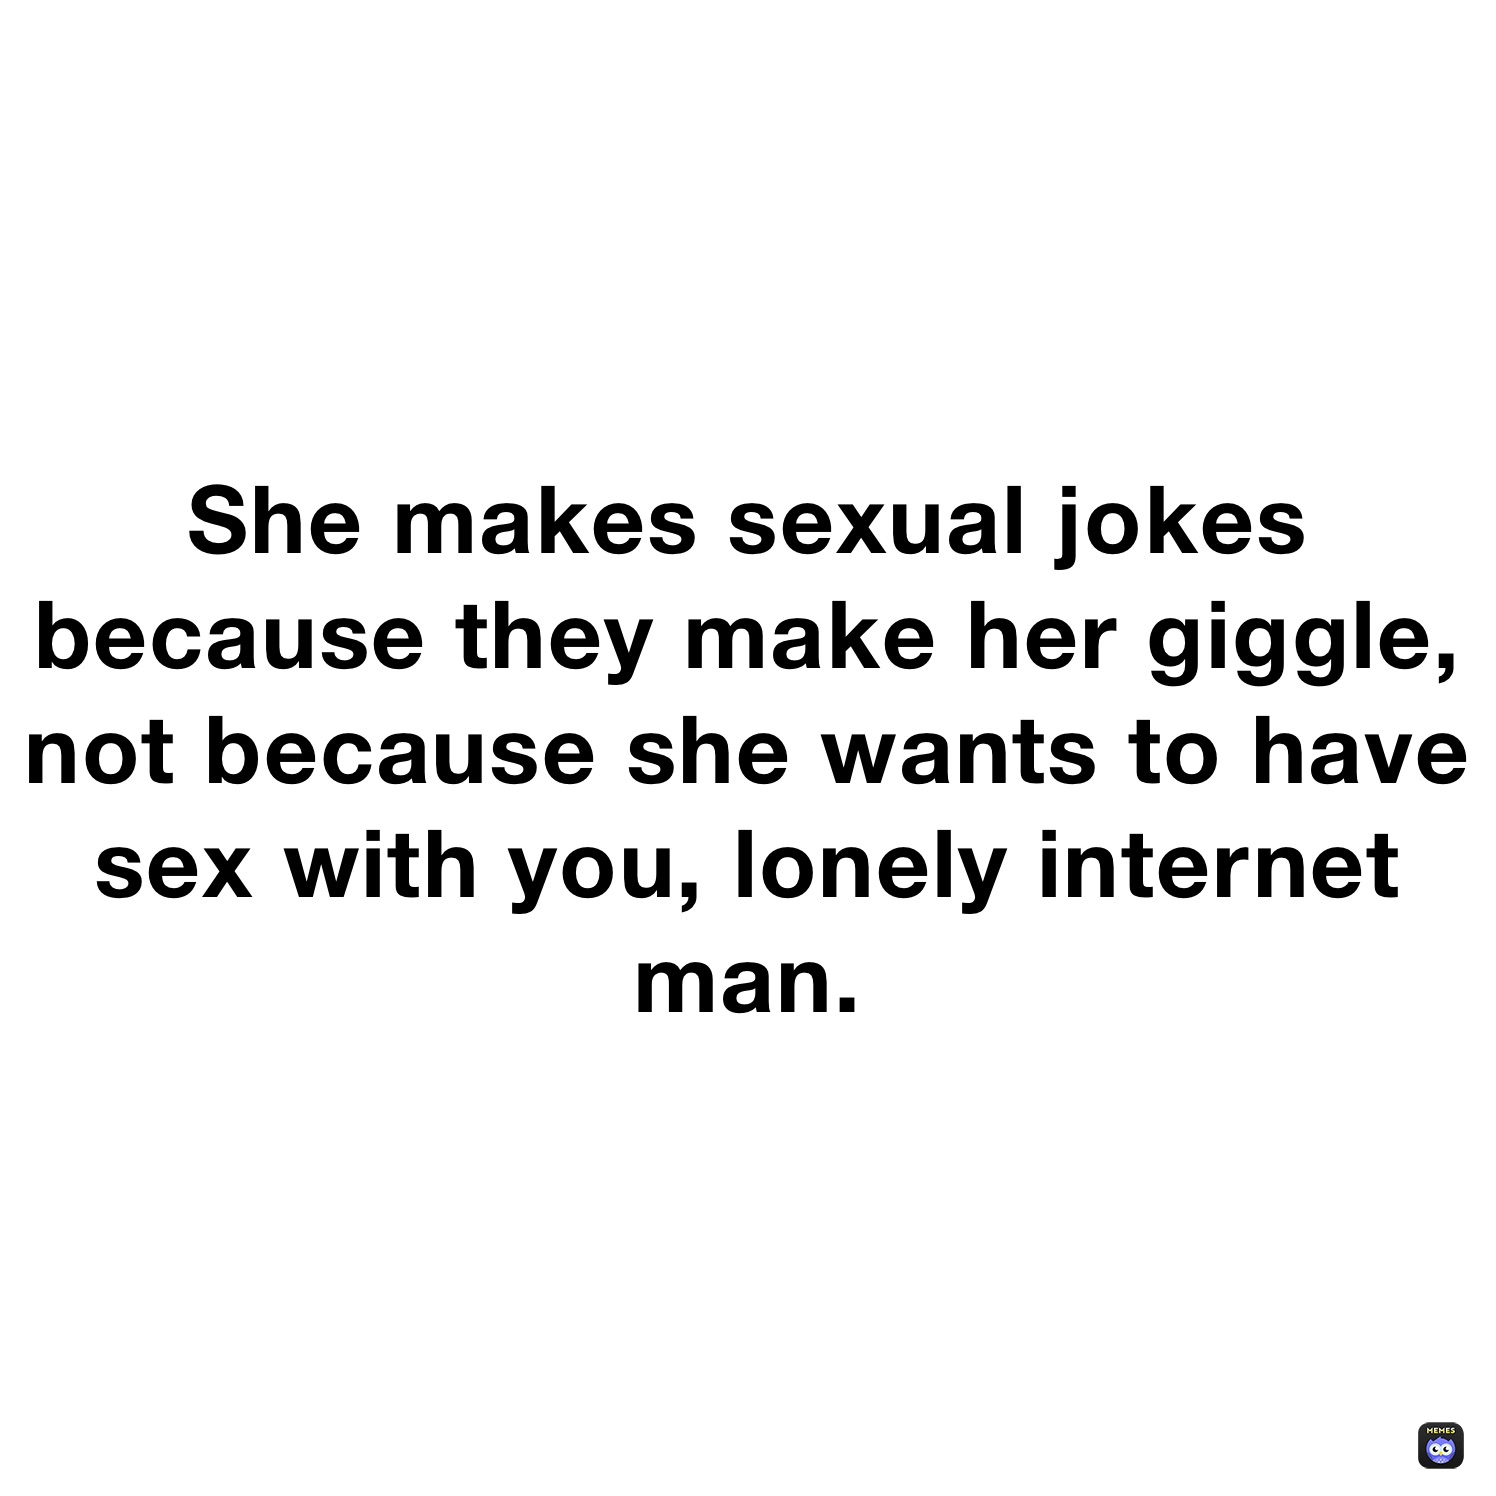 She makes sexual jokes because they make her giggle, not because she wants to have sex with you, lonely internet image